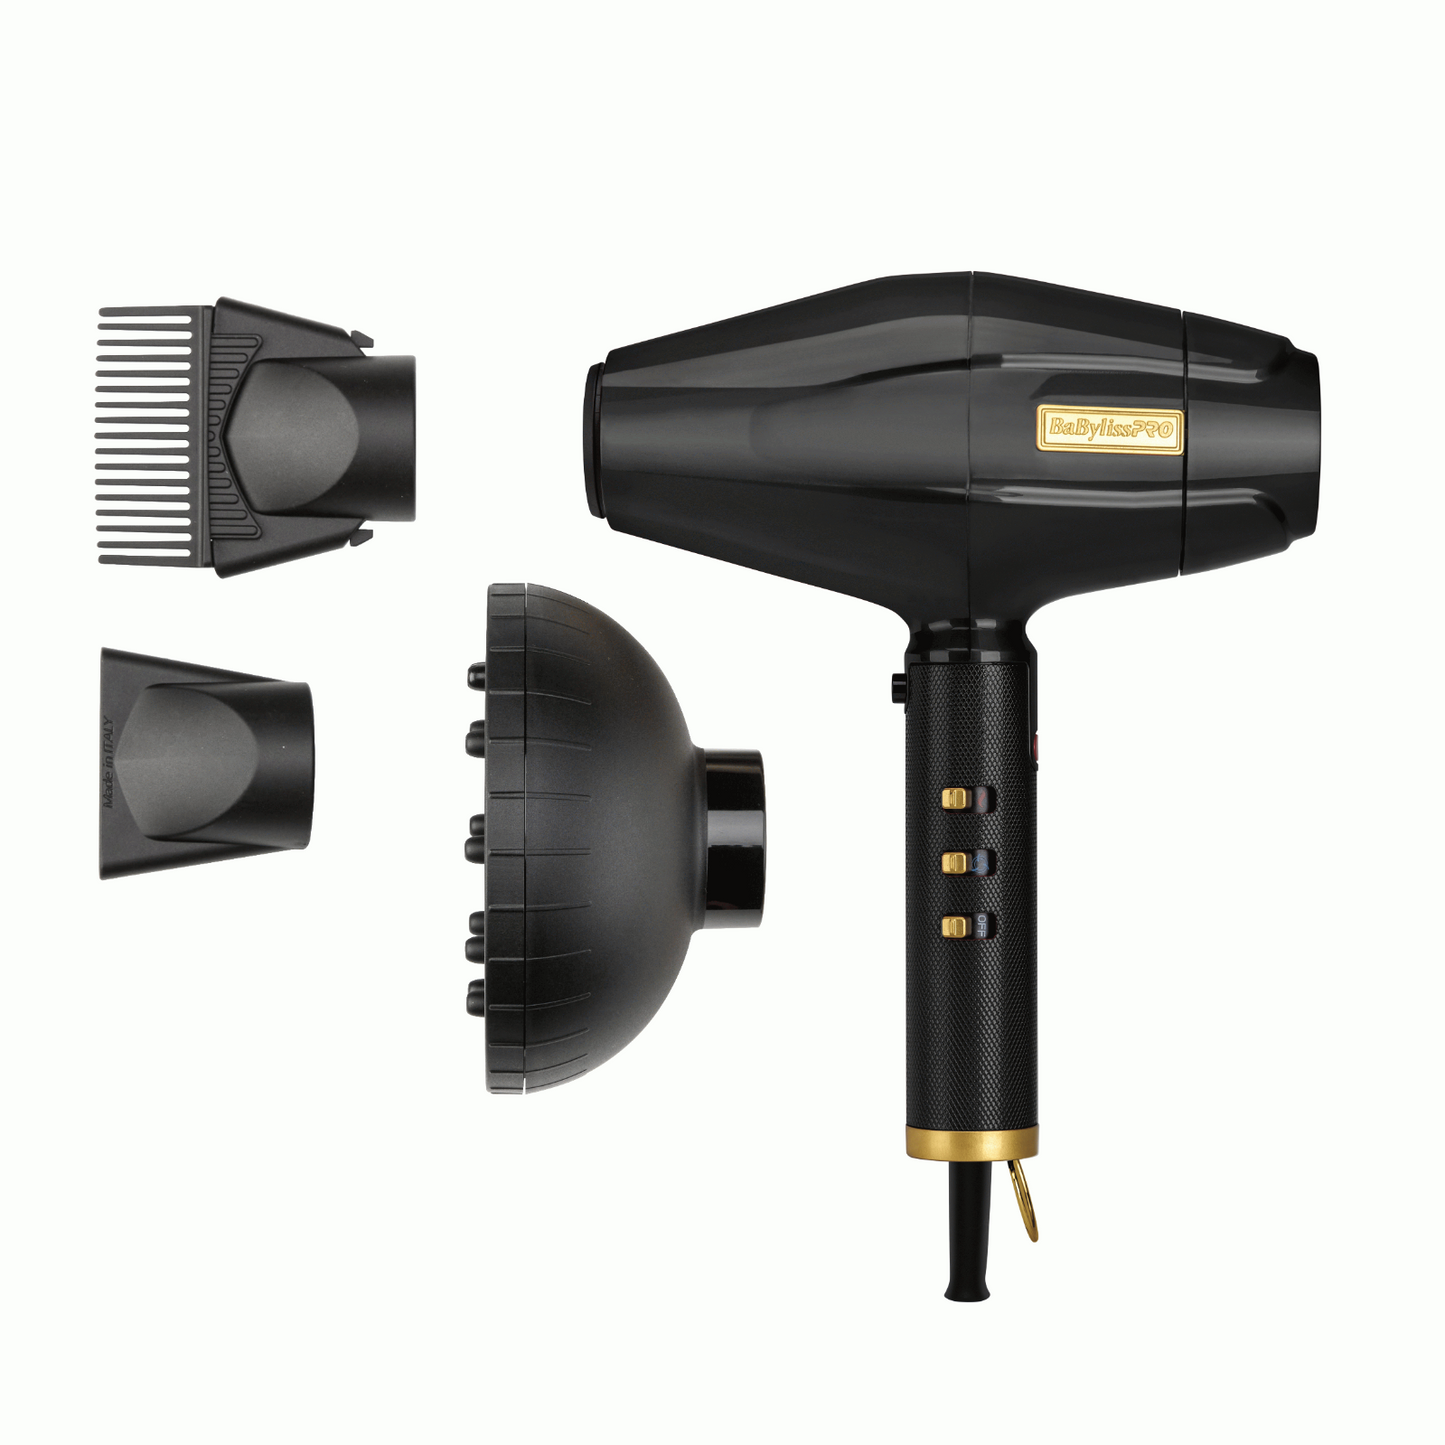 BaByliss PRO Black FX High Performance Turbo Hair Blow Dryer (Black and gold) Stay Gold edition